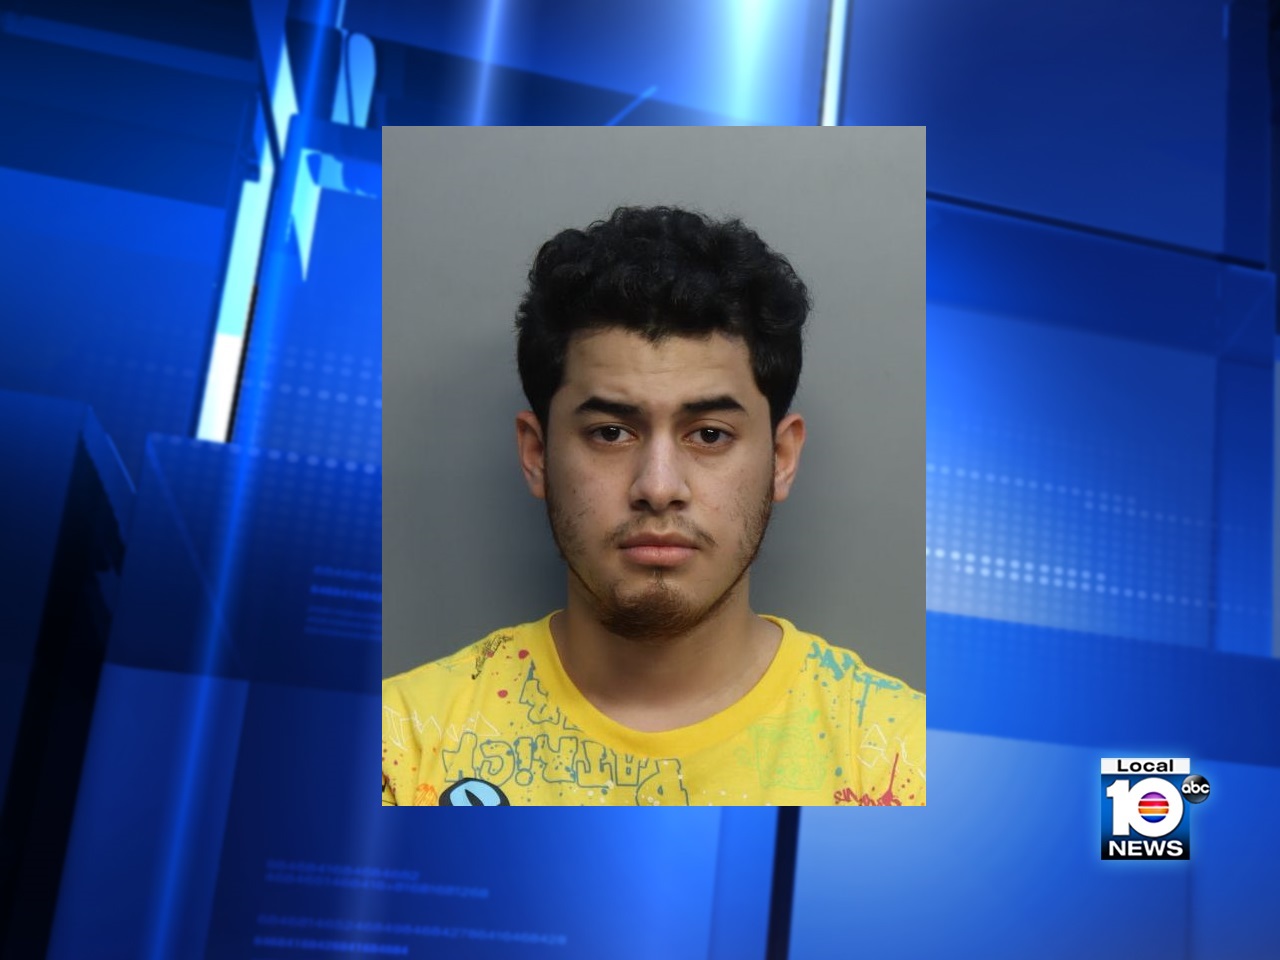 Teen Arrested - 19-year-old arrested after allegedly uploading child porn to social media  accounts, police say